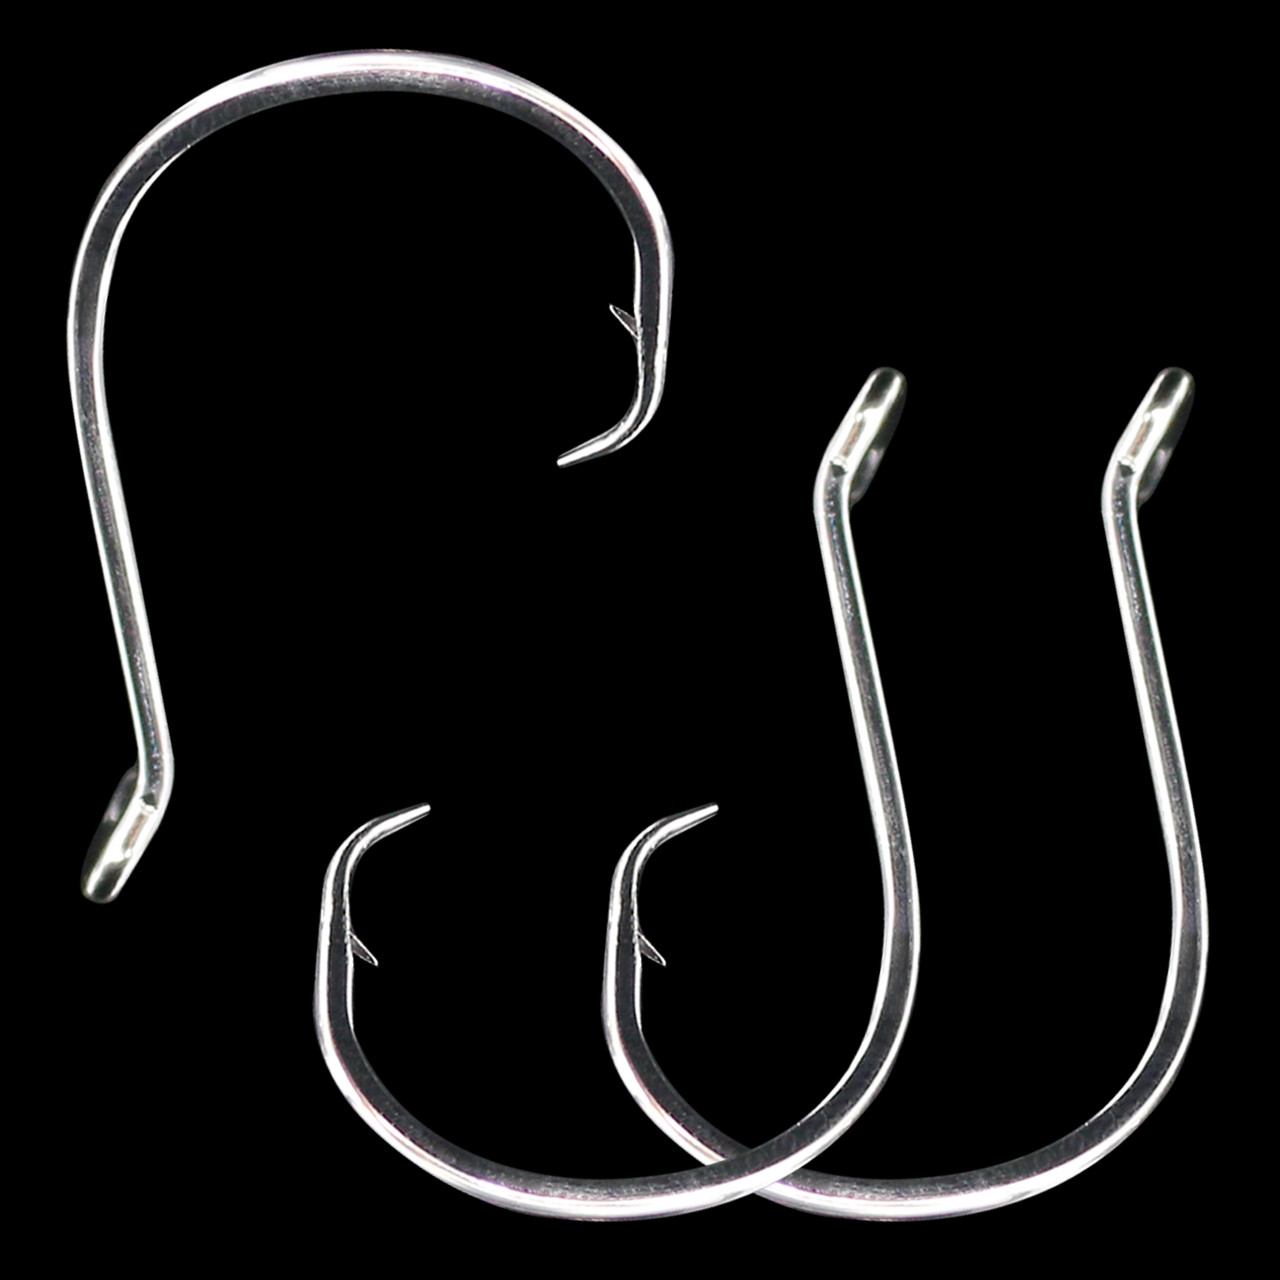 Fishing Hooks Set (Pack of 2) - 2 Pcs of Stainless Steel Small